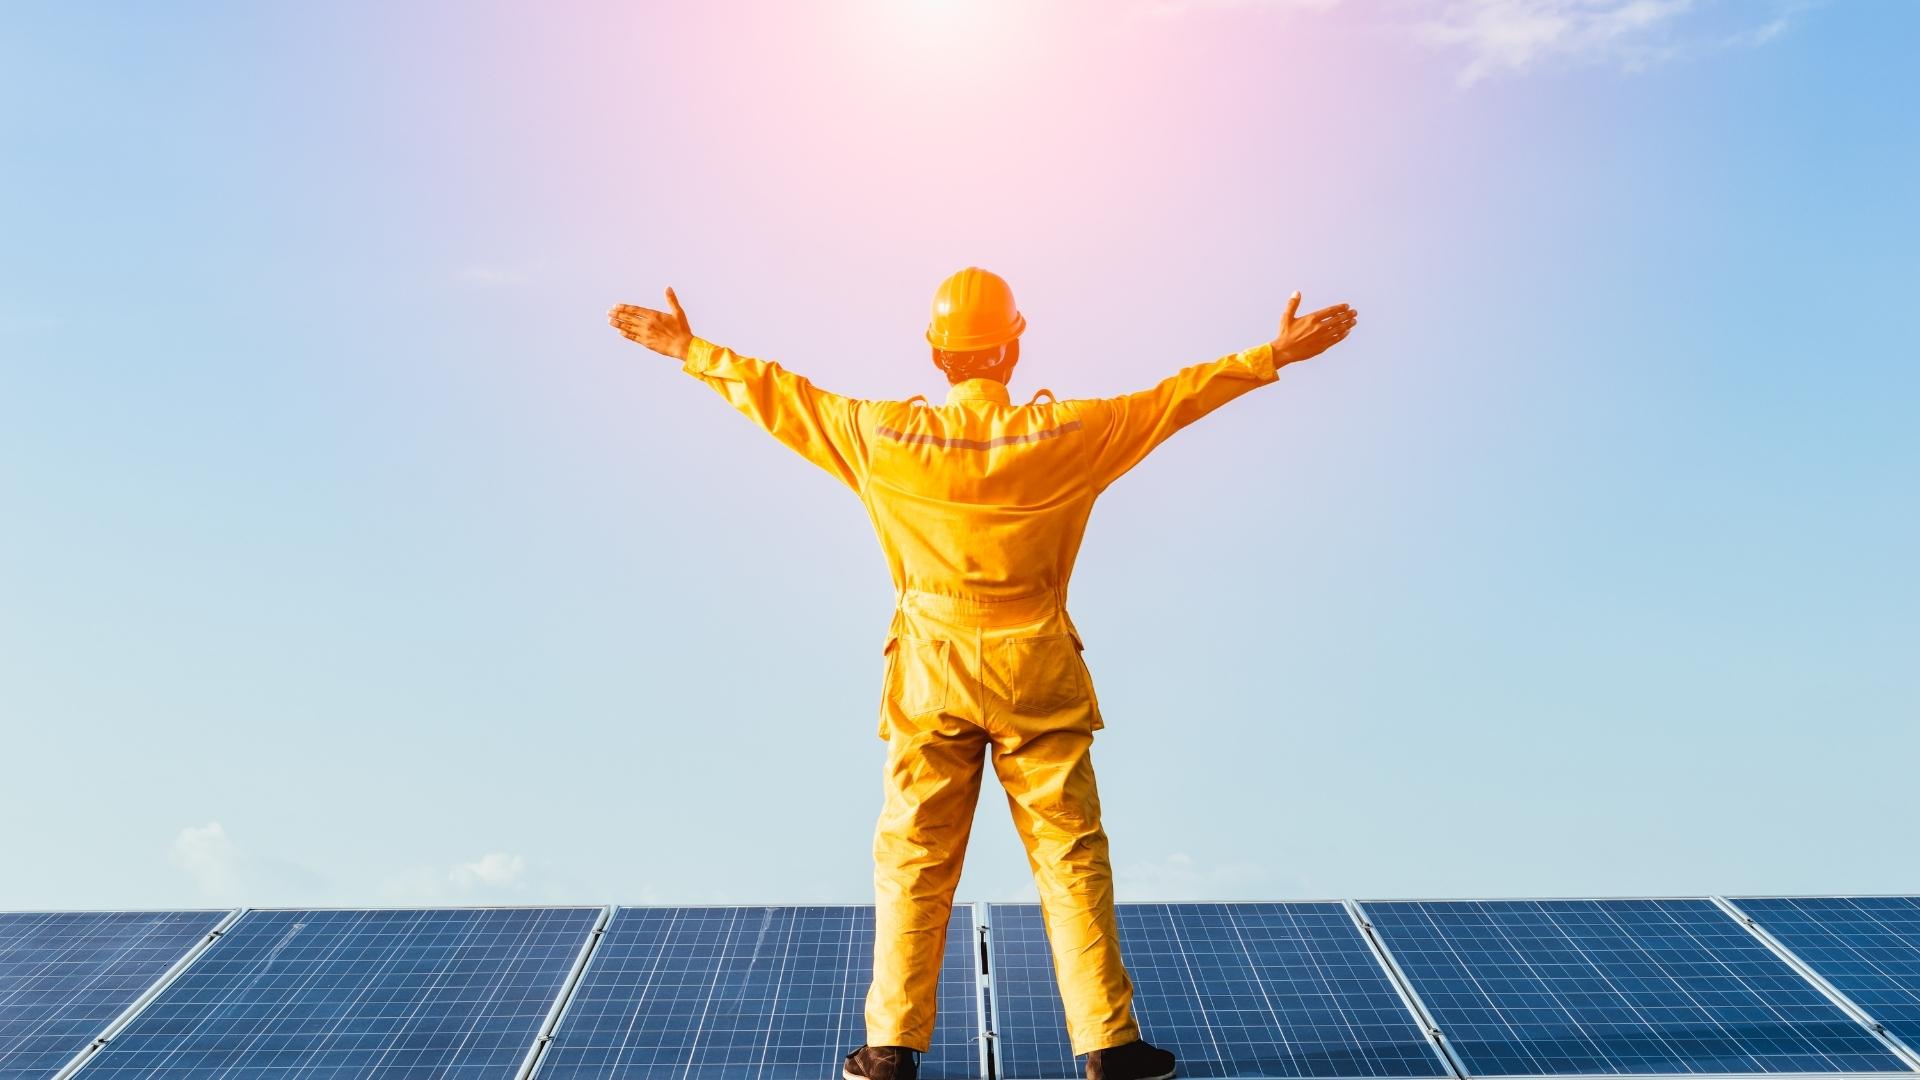 Photo of a solar technician standing on a solar panel array welcoming the power of the sun